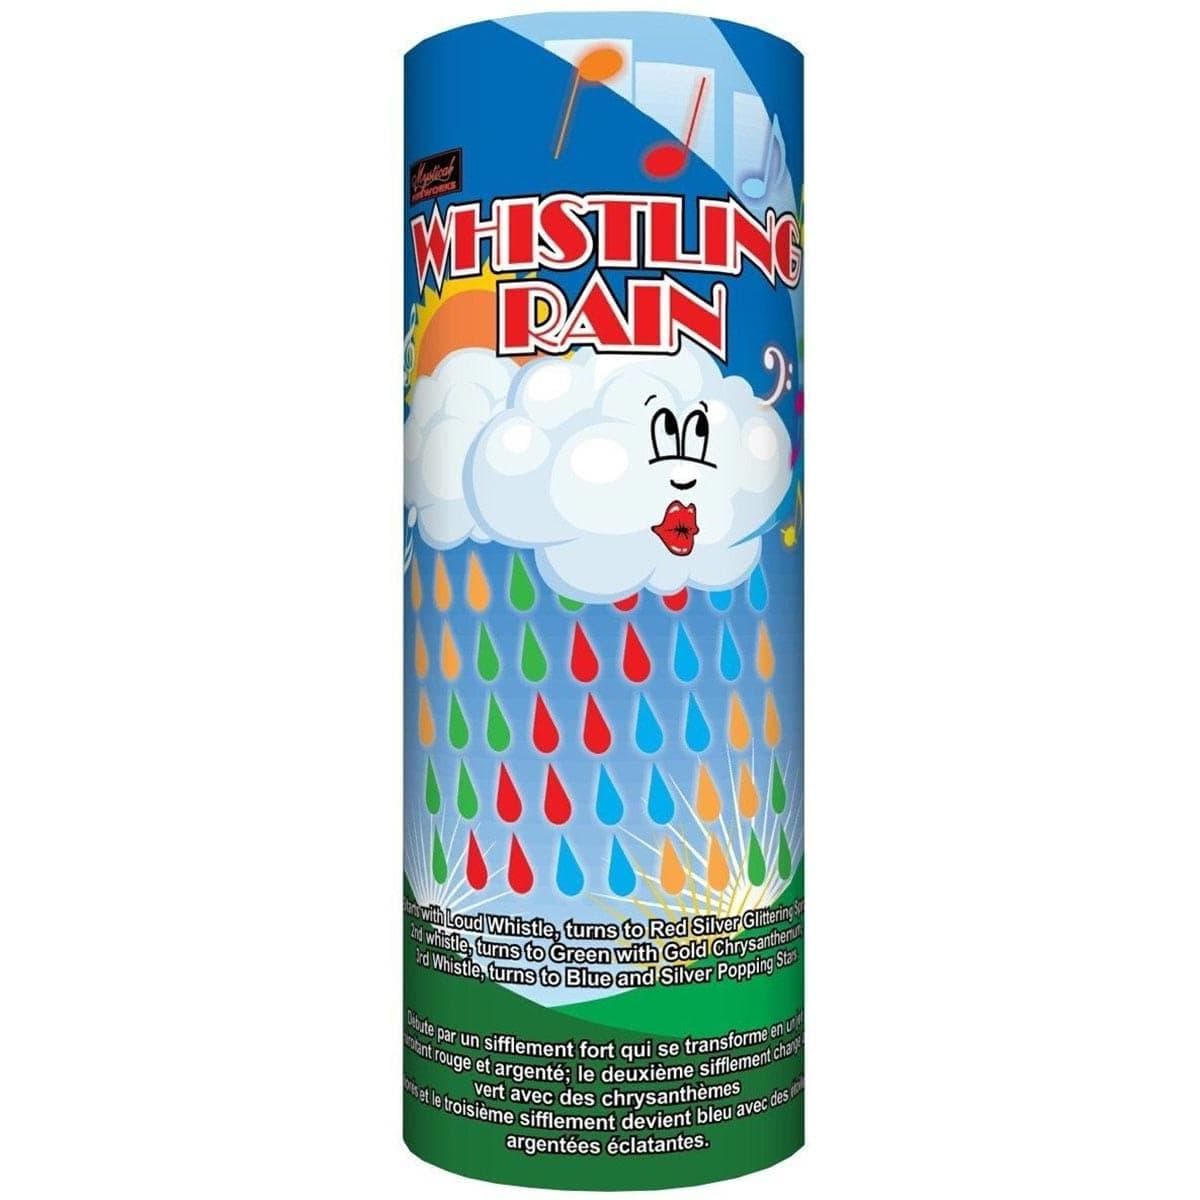 Buy Fireworks Whistling Rain sold at Party Expert